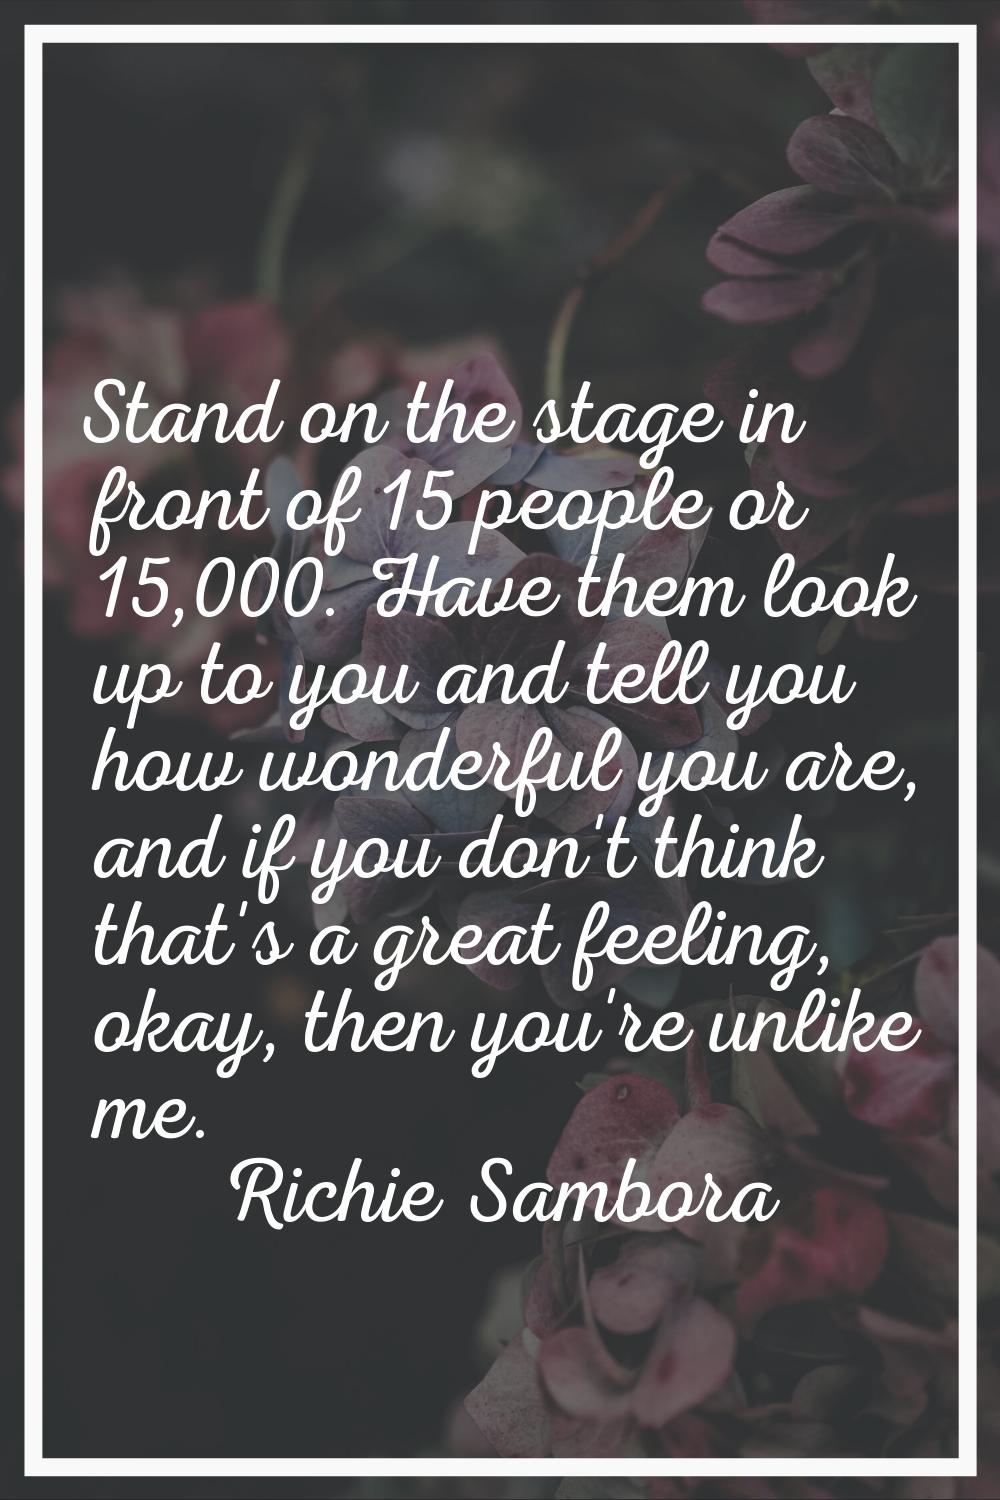 Stand on the stage in front of 15 people or 15,000. Have them look up to you and tell you how wonde